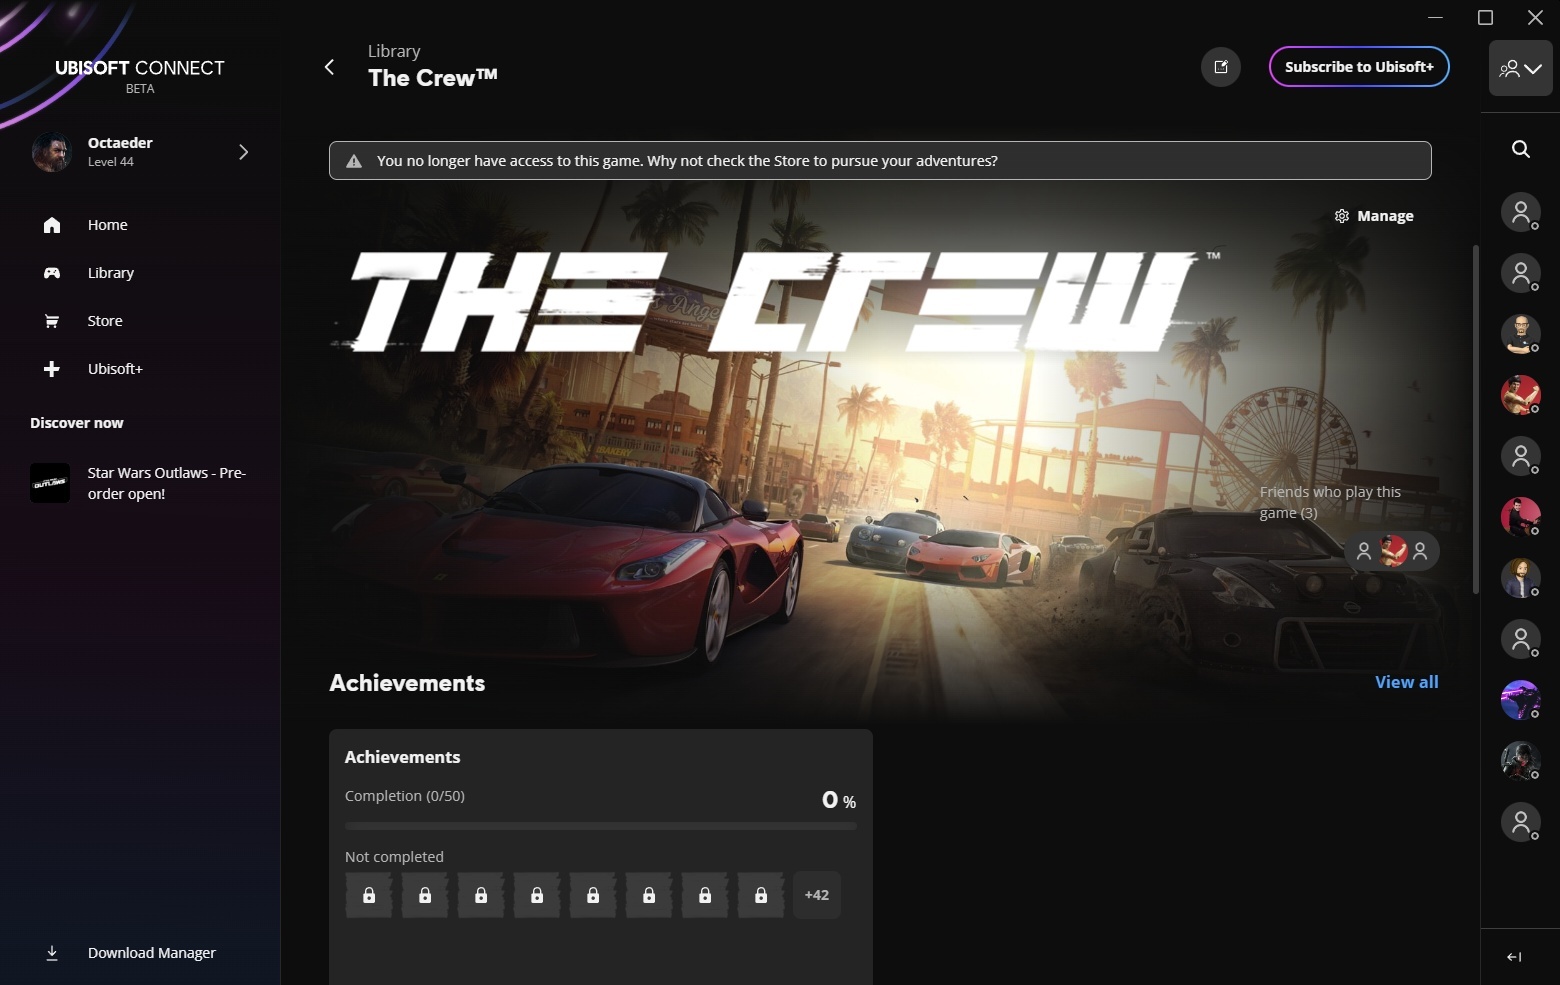 Ubisoft Connect's store which shows that the licence for The Crew has been revoked.